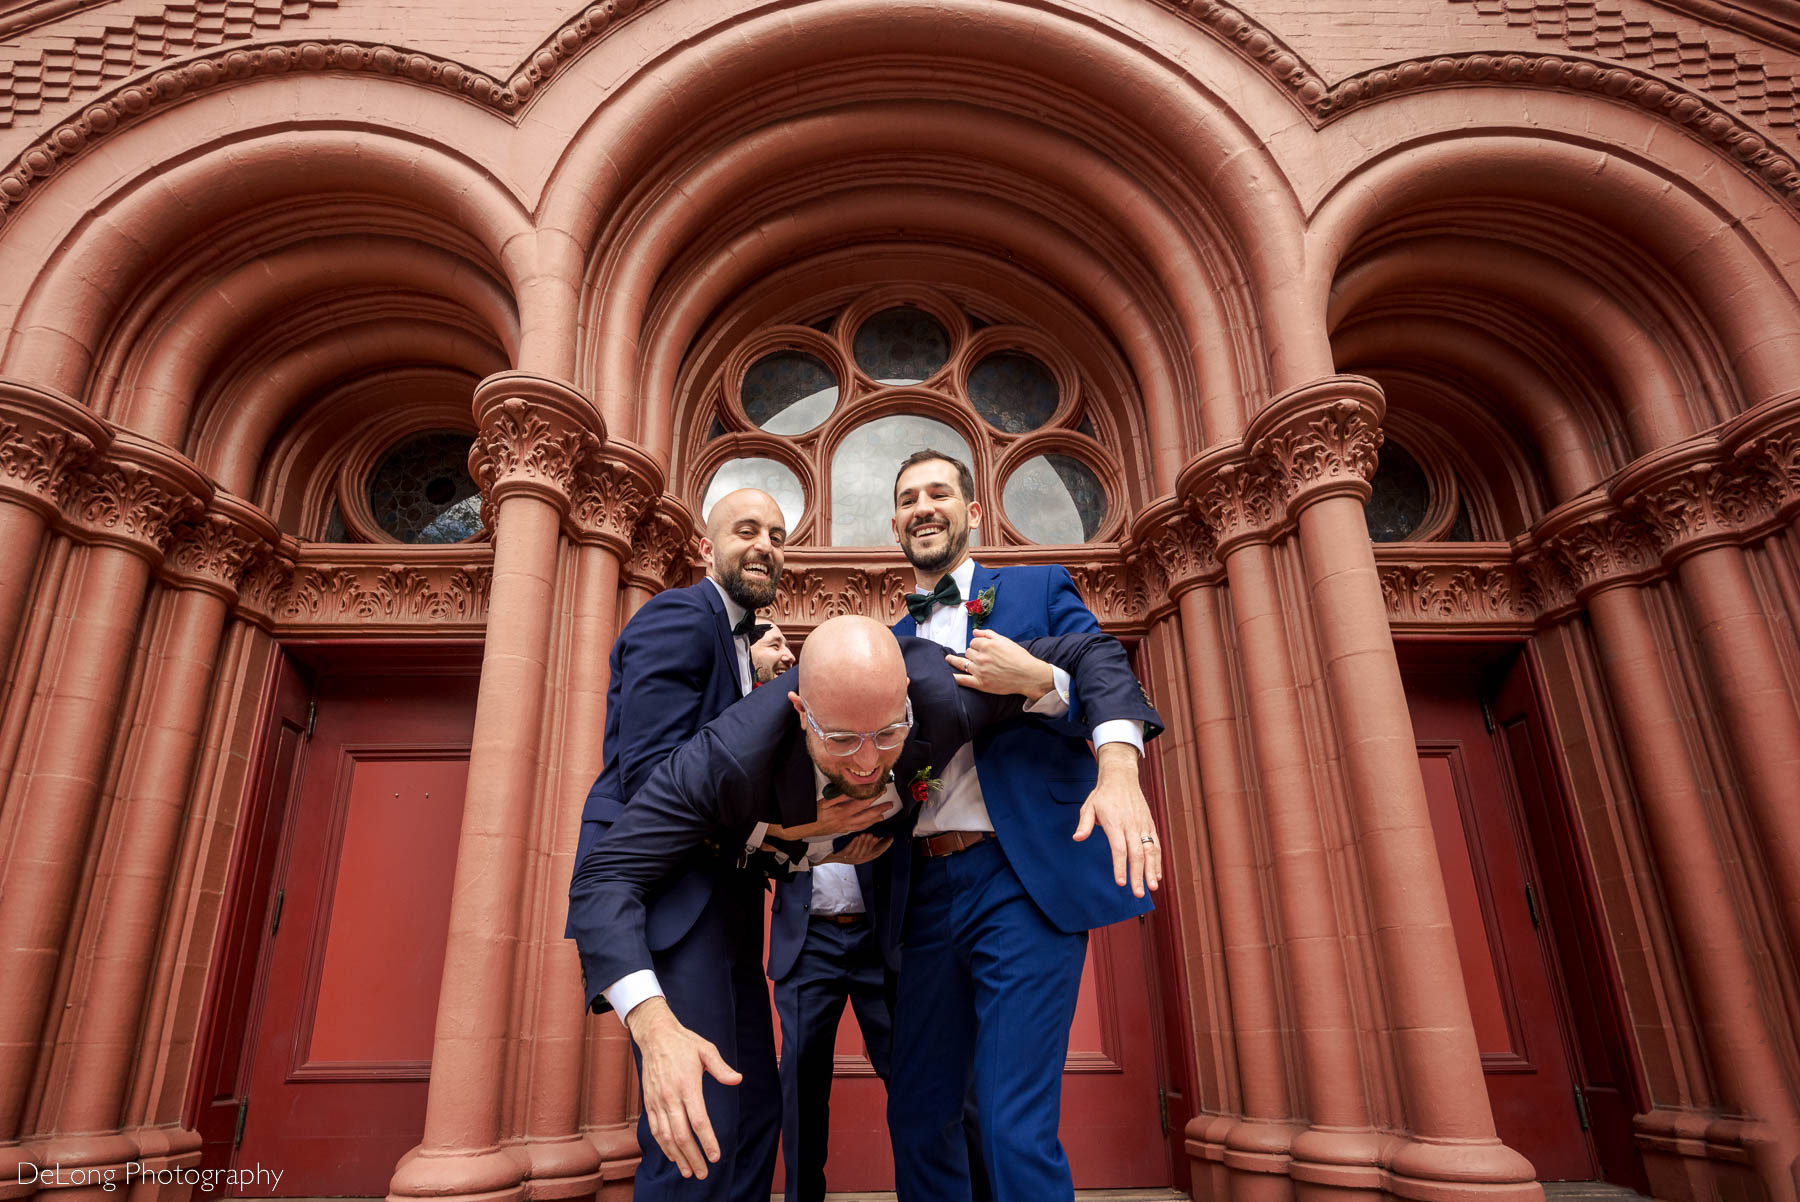 Groomsmen having fun picking up groom outside the arched doorway of the Basilica of the Sacred Heart of Jesus in Atlanta, GA by Charlotte wedding photographers DeLong Photography 